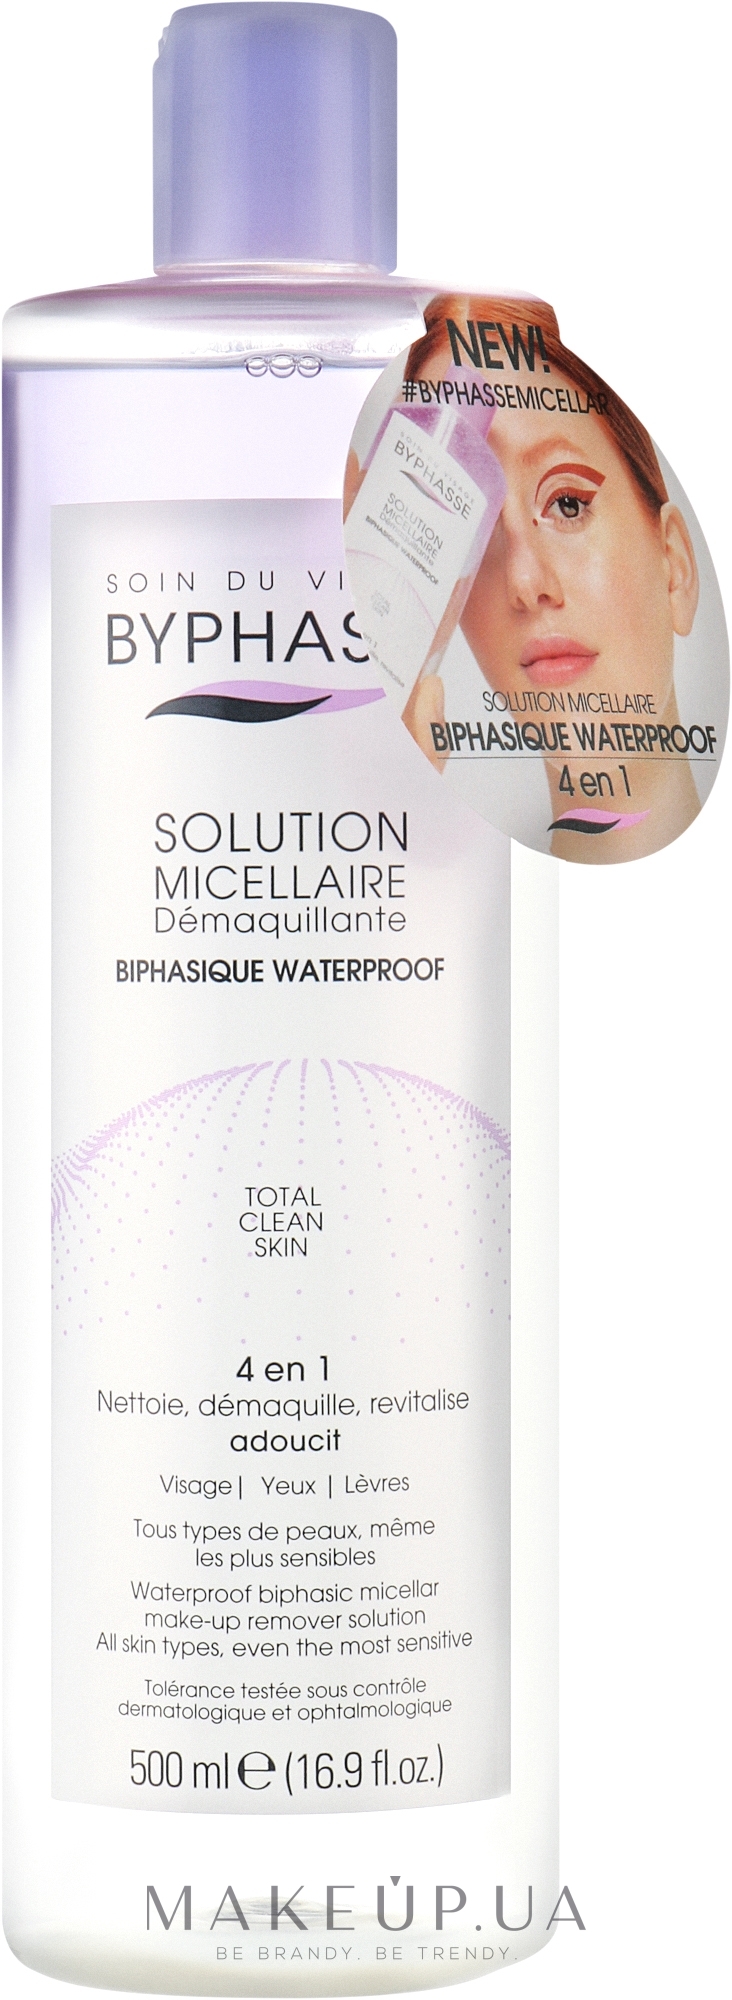 Byphasse Waterproof Make-up Remover Micellar Solution - Byphasse Waterproof Make-up Remover Micellar Solution — фото 500ml